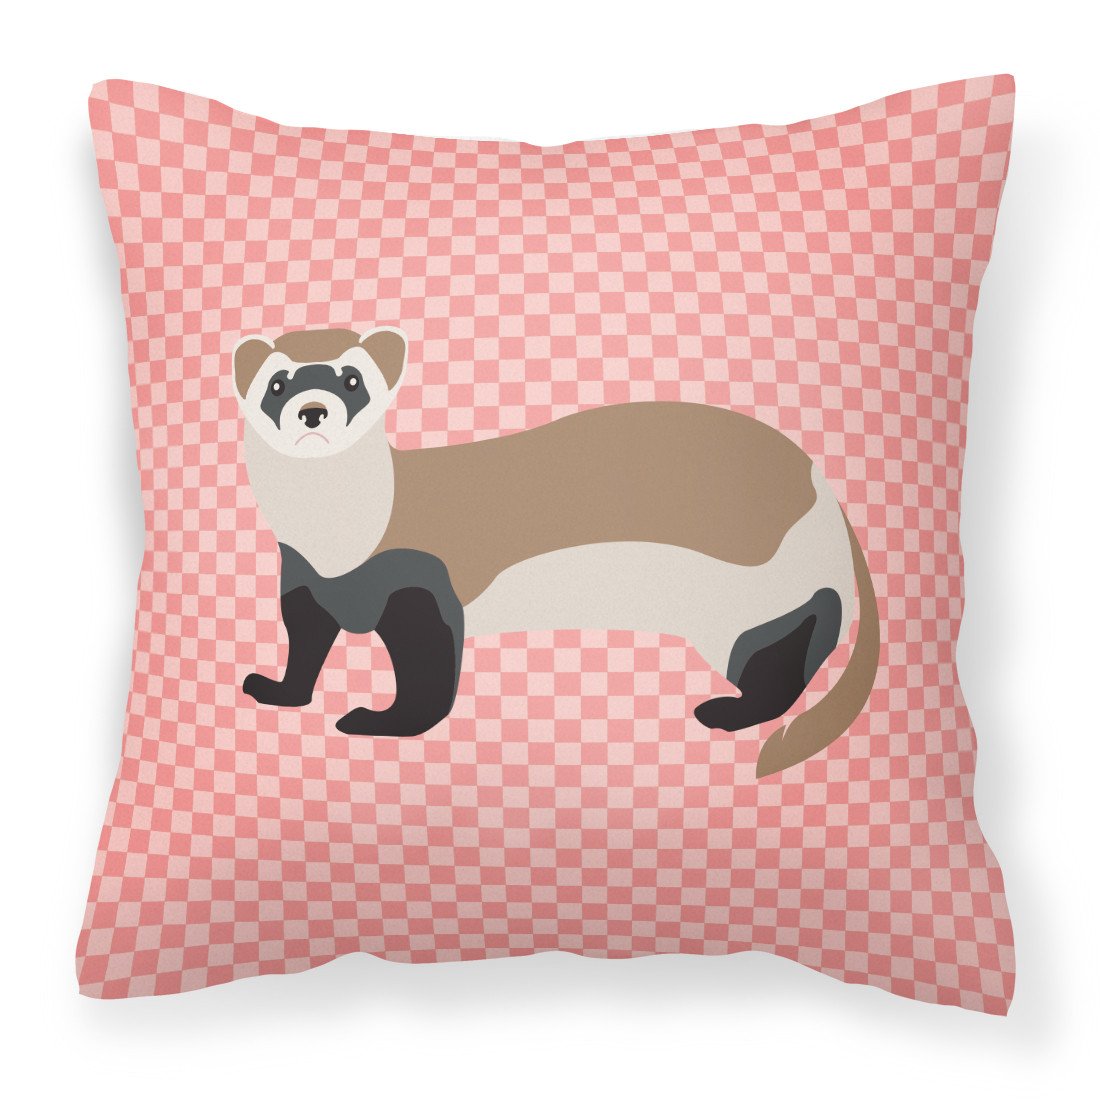 Ferret Pink Check Fabric Decorative Pillow BB7878PW1818 by Caroline's Treasures